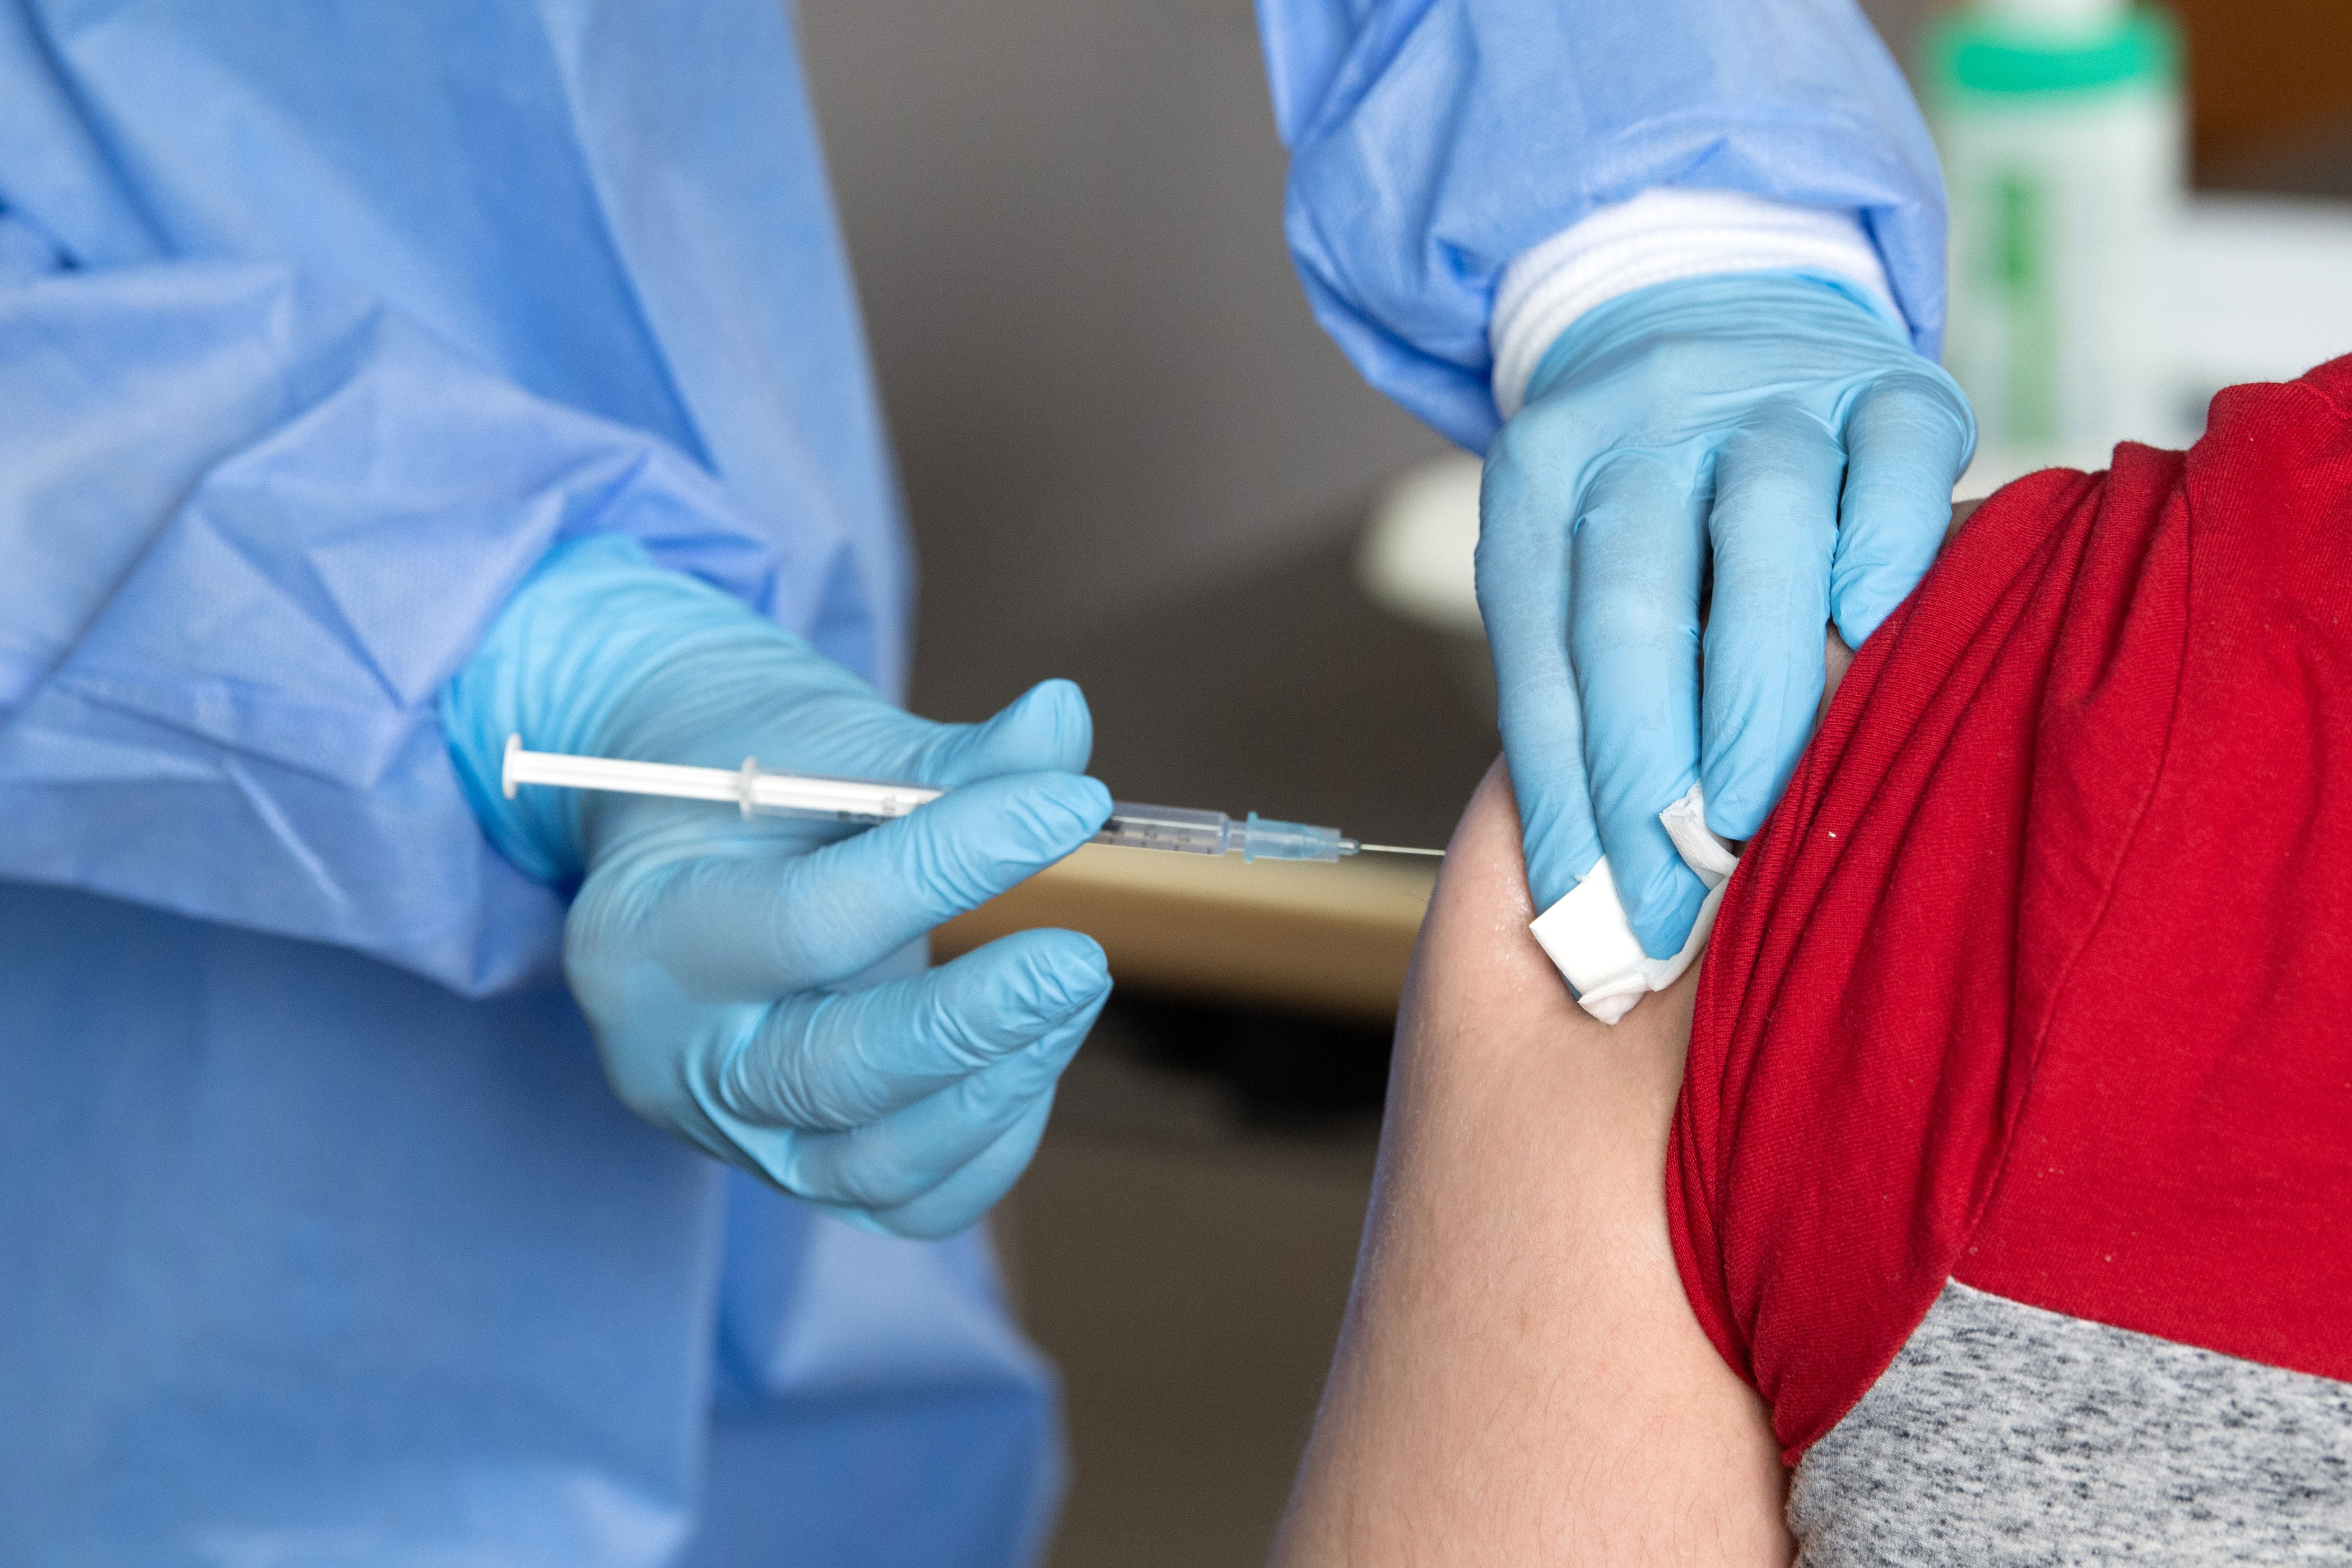 A person receives the Johnson & Johnson Covid-19 vaccine in Düsseldorf, Germany, on May 3.